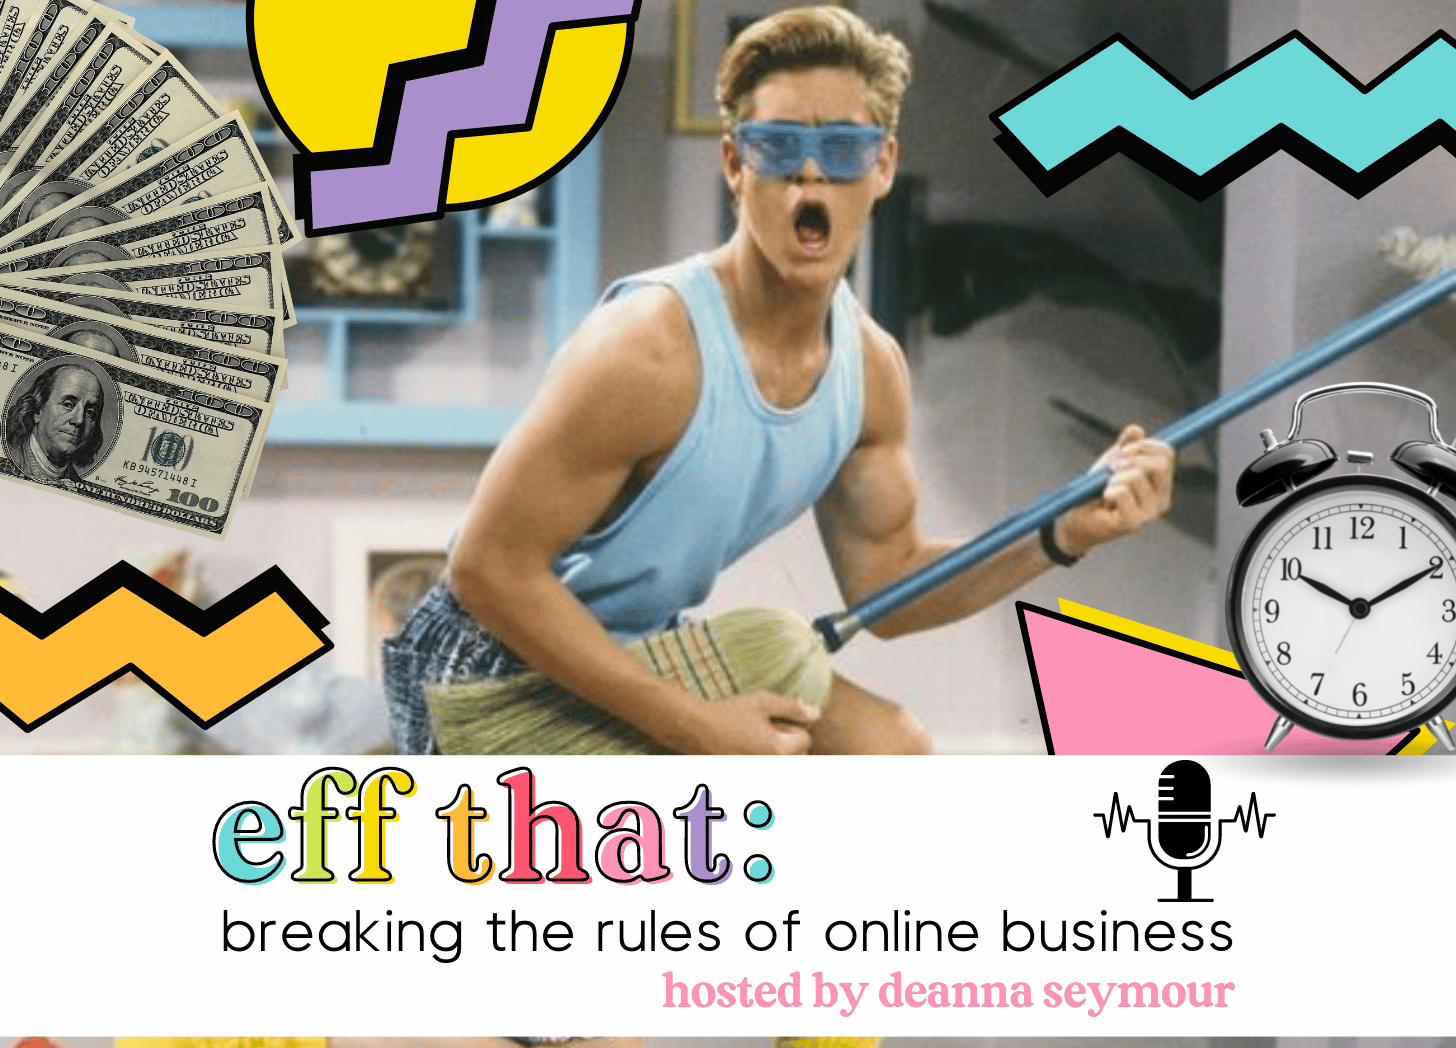 A collage of Zack Morris playing a broom as a guitar with blue sunglasses on. There are 90s graphic elements around him and fanned out $100 bills and an alarm clock. The words "Eff that: breaking the rules of online business hosted by Deanna Seymour" are at the bottom.